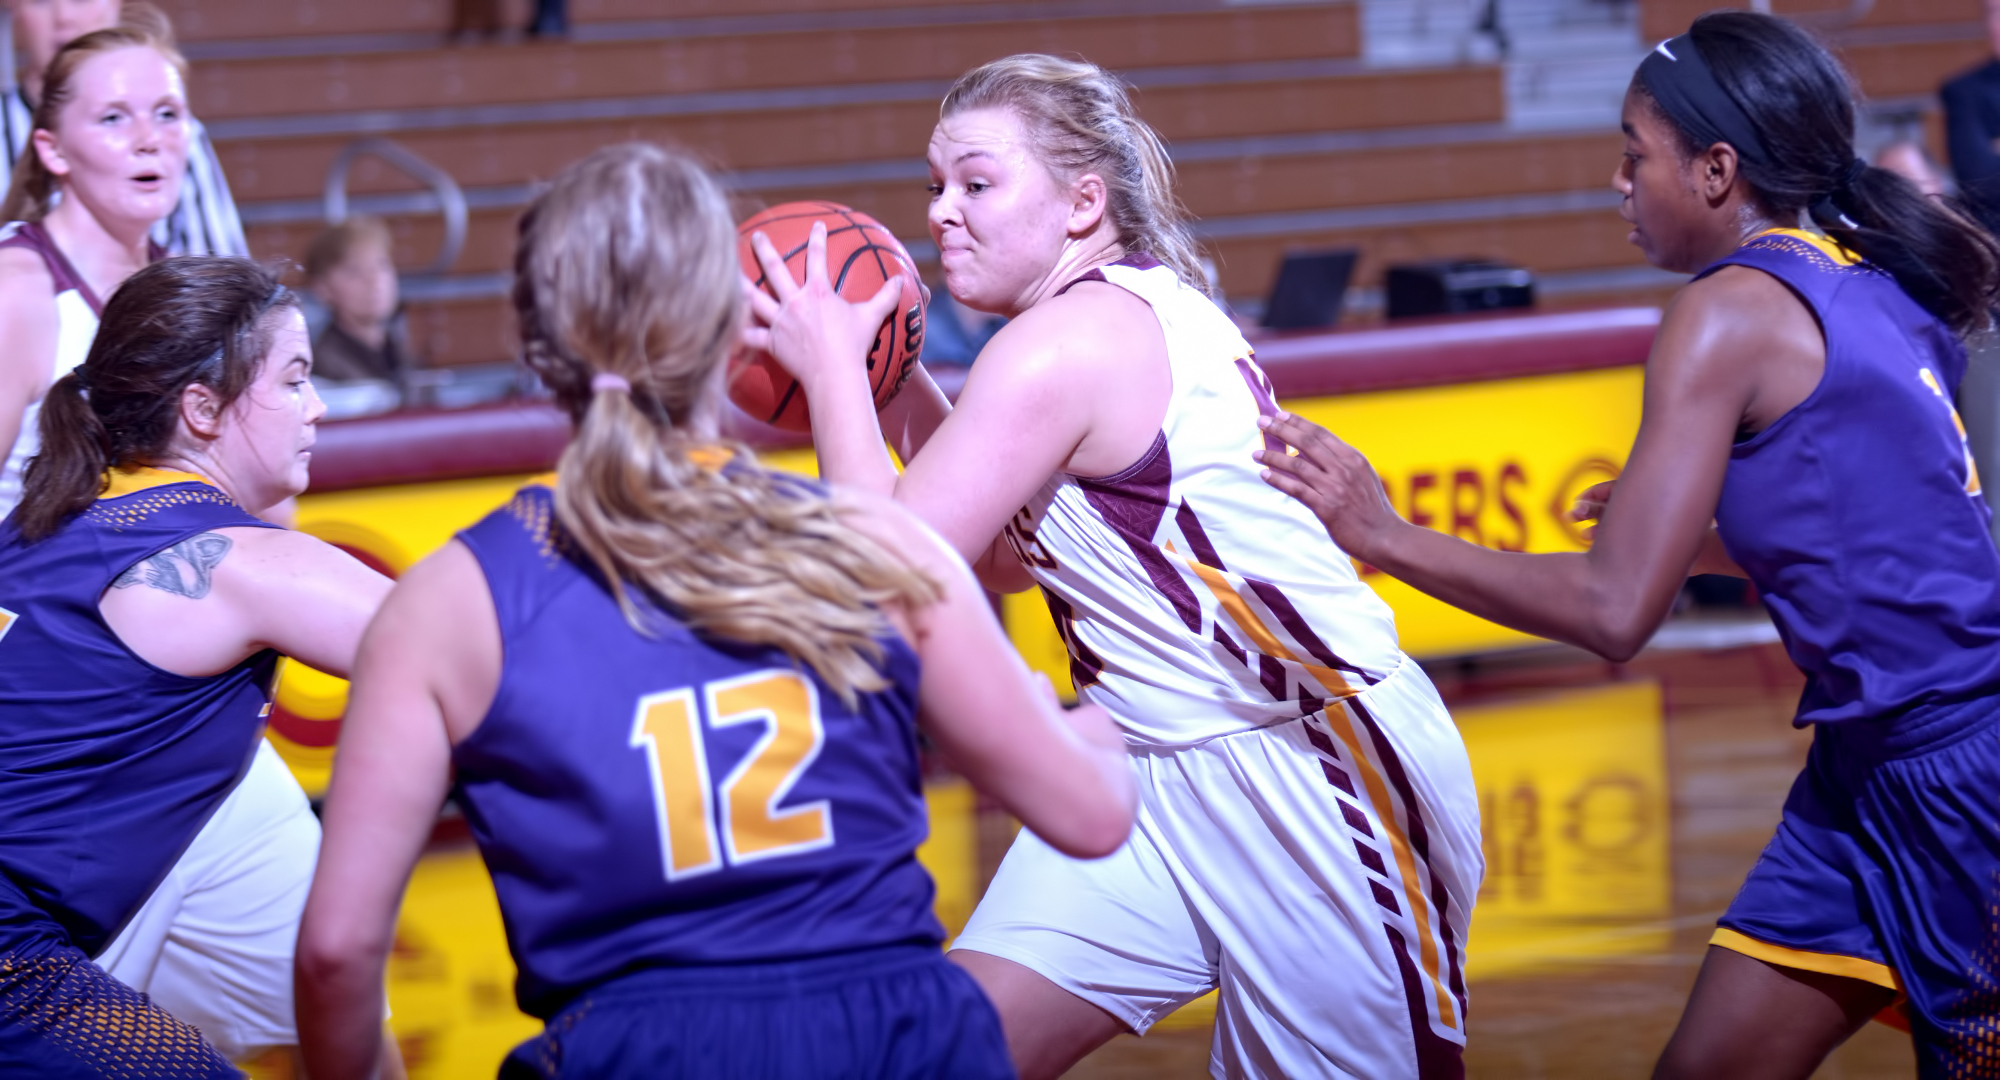 Sophomore Mira Ellefson drives to the basket for a clutch basket in the fourth quarter of the Cobbers' win over St. Catherine.